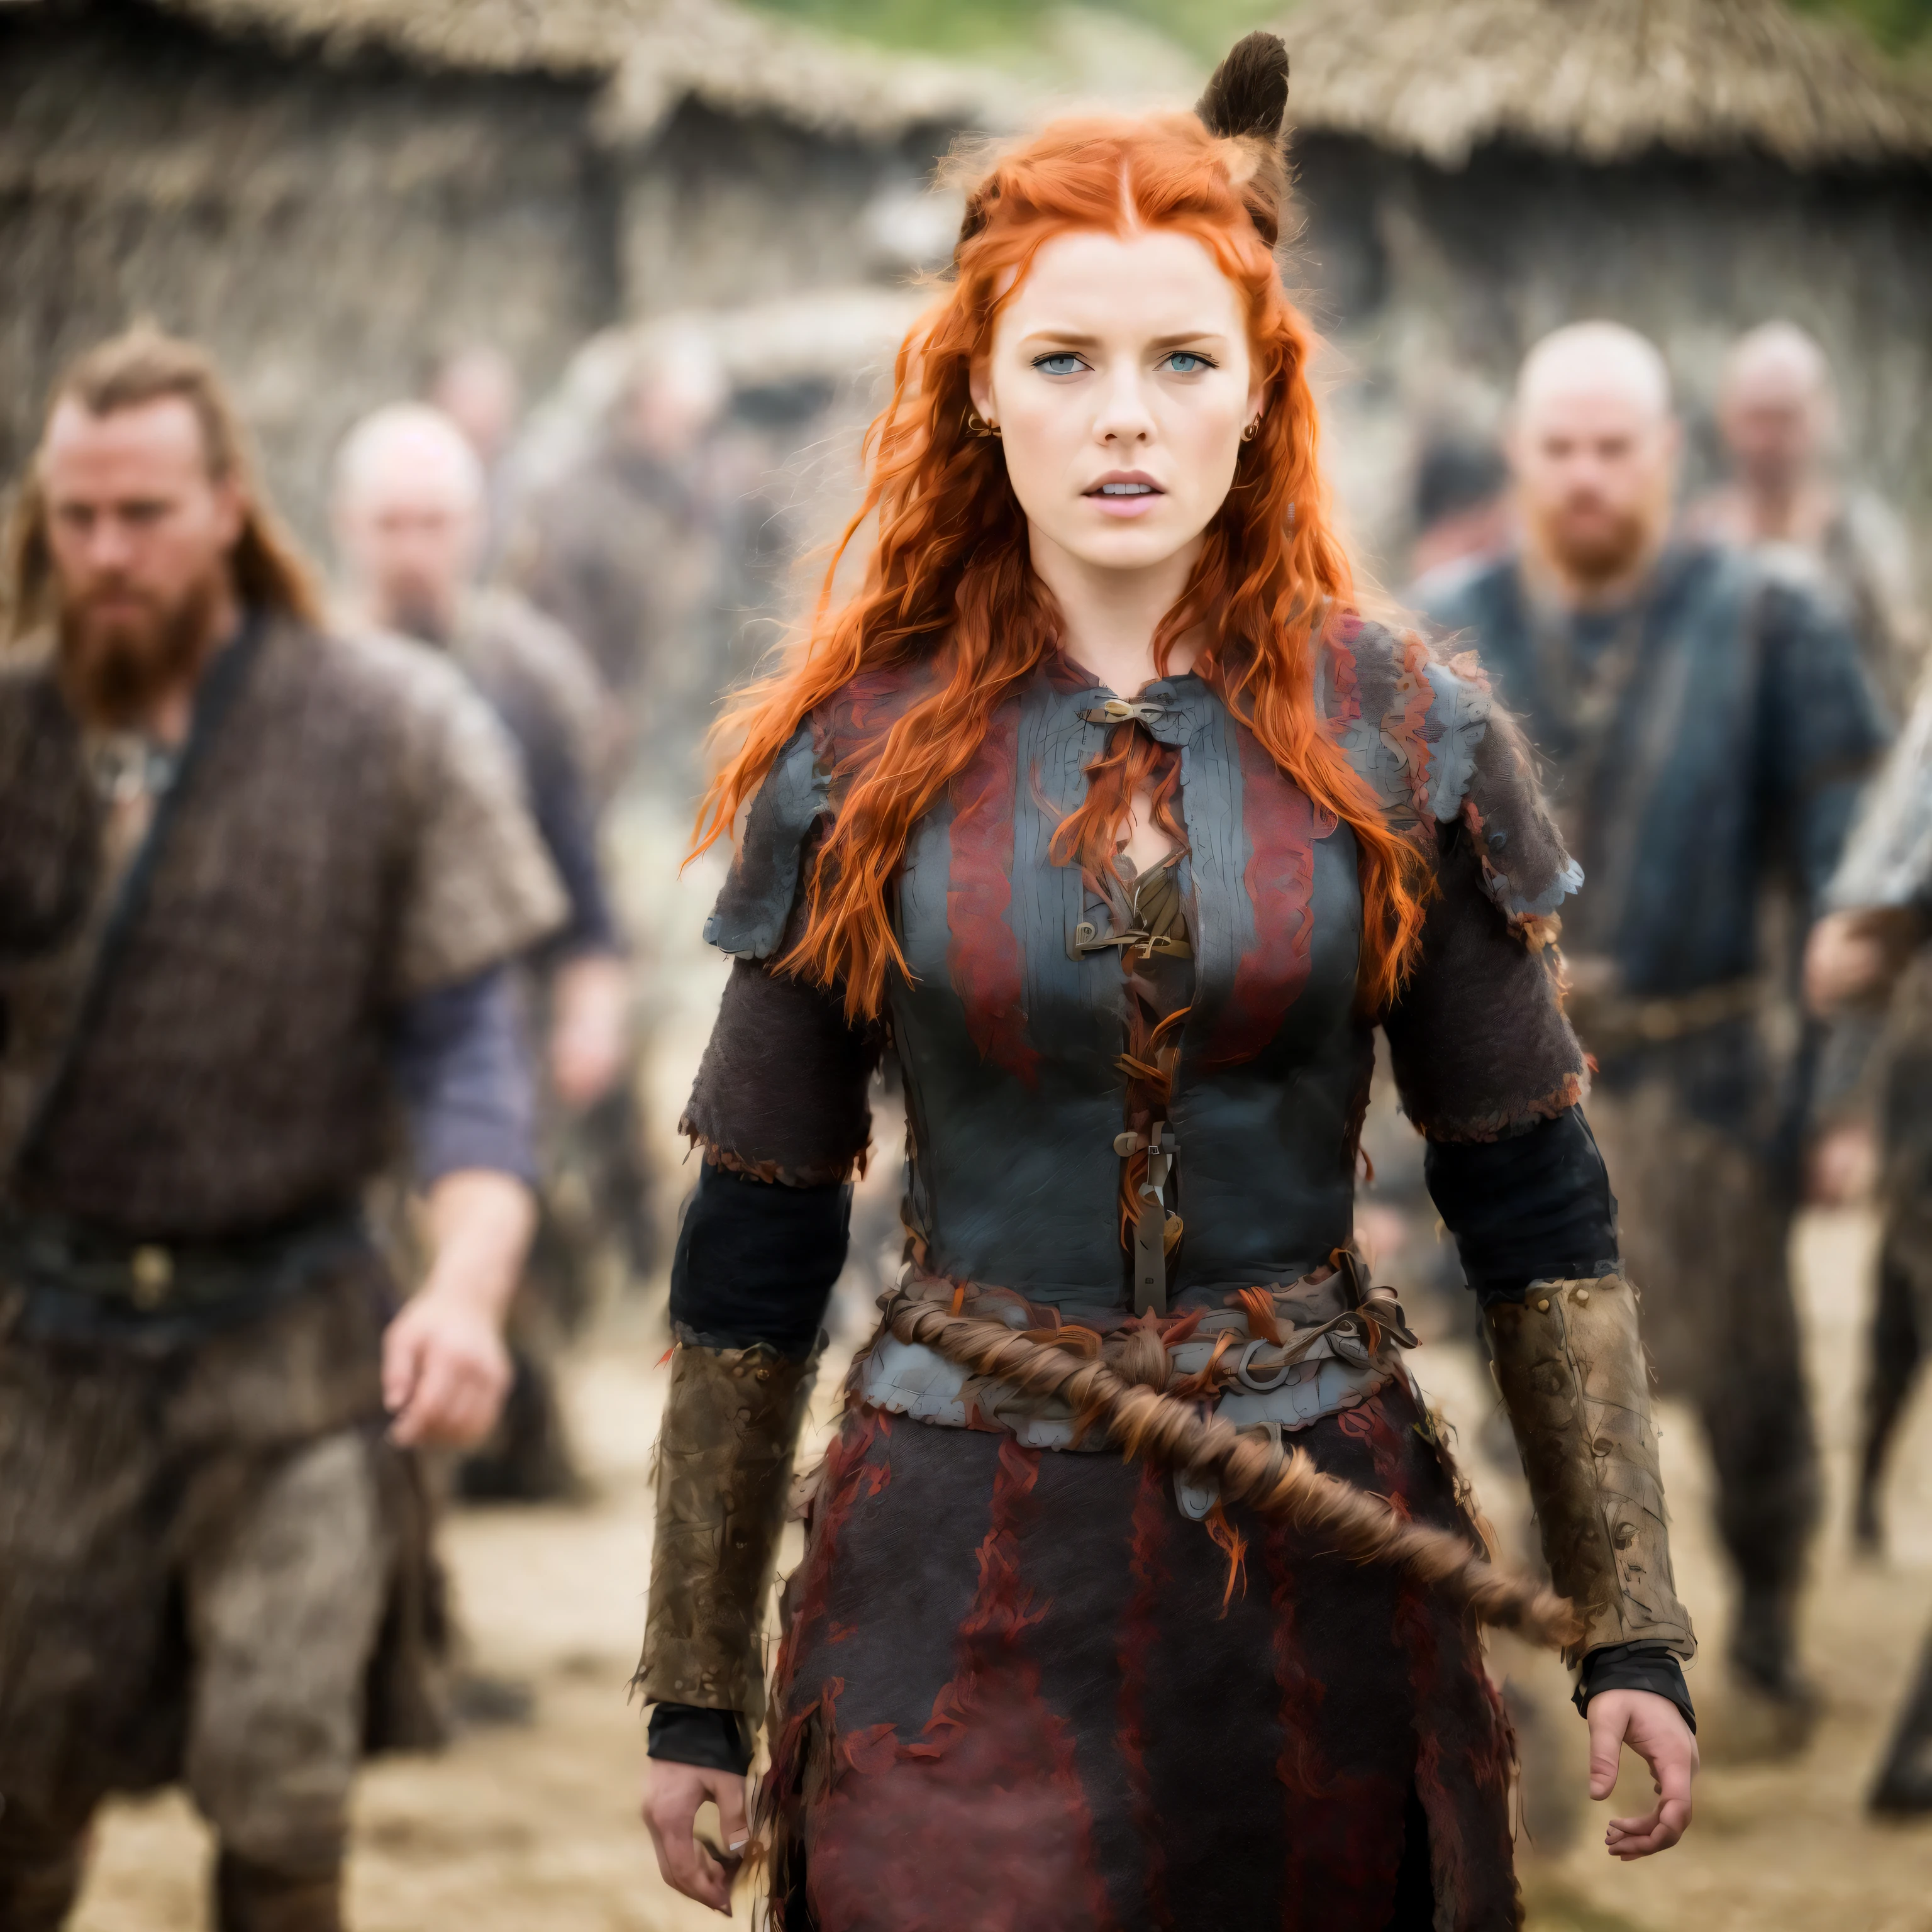 A red haired viking girl wearing a black futuristic armor, walking inside a tribal village with people in the background. The woman looks passionate. The photograph is highly detailed, bokeh